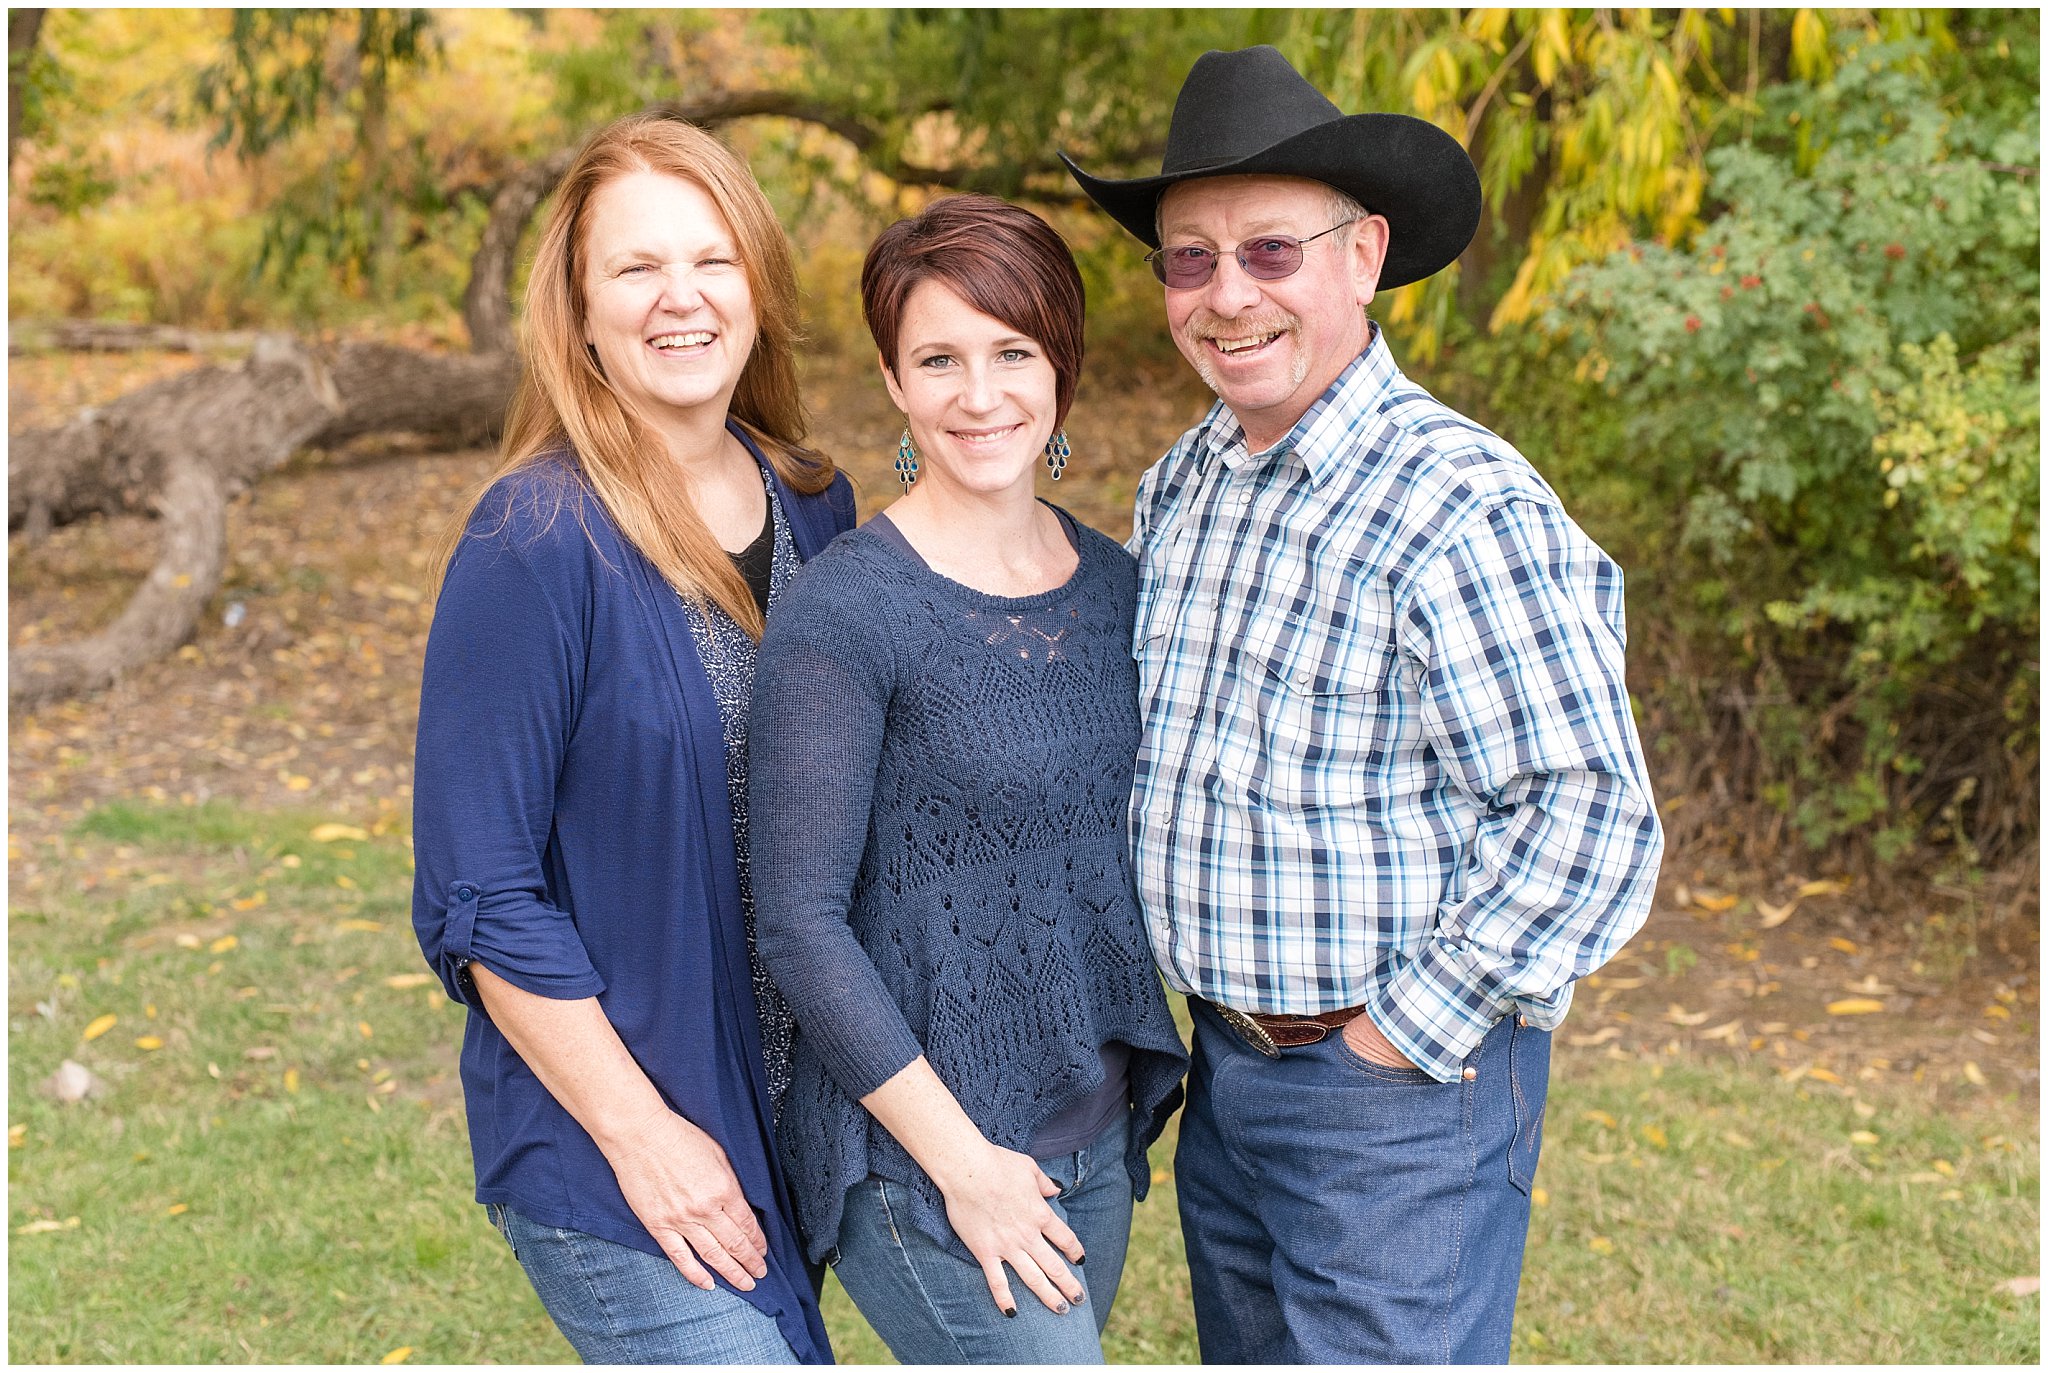 Parents with grown up daughter in the fall leaves | Tremonton Family Pictures and Make a Wish Event | Jessie and Dallin Photography